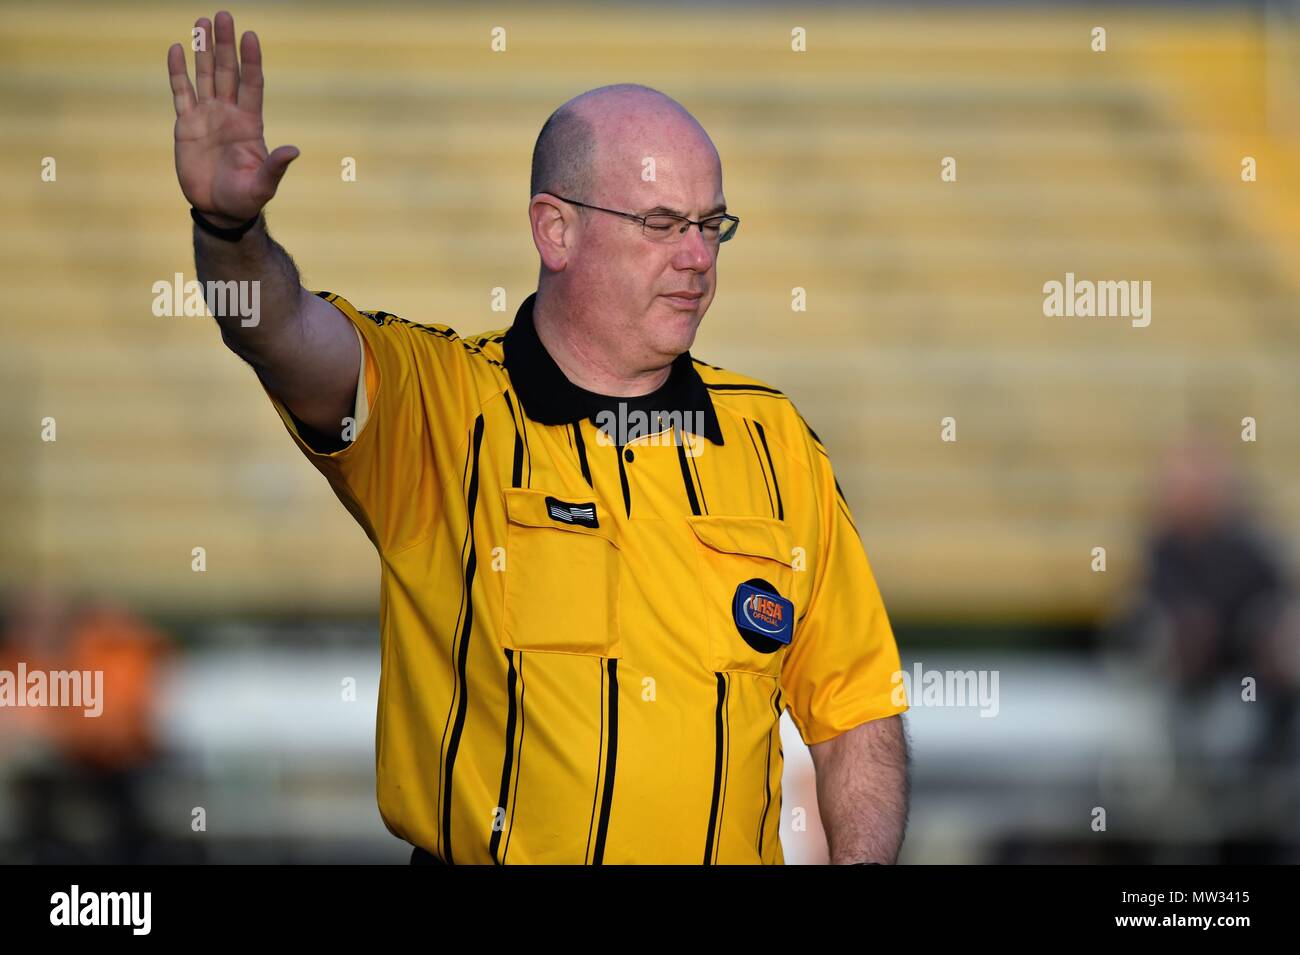 Referee gesturing during a high school soccer match. USA. Stock Photo